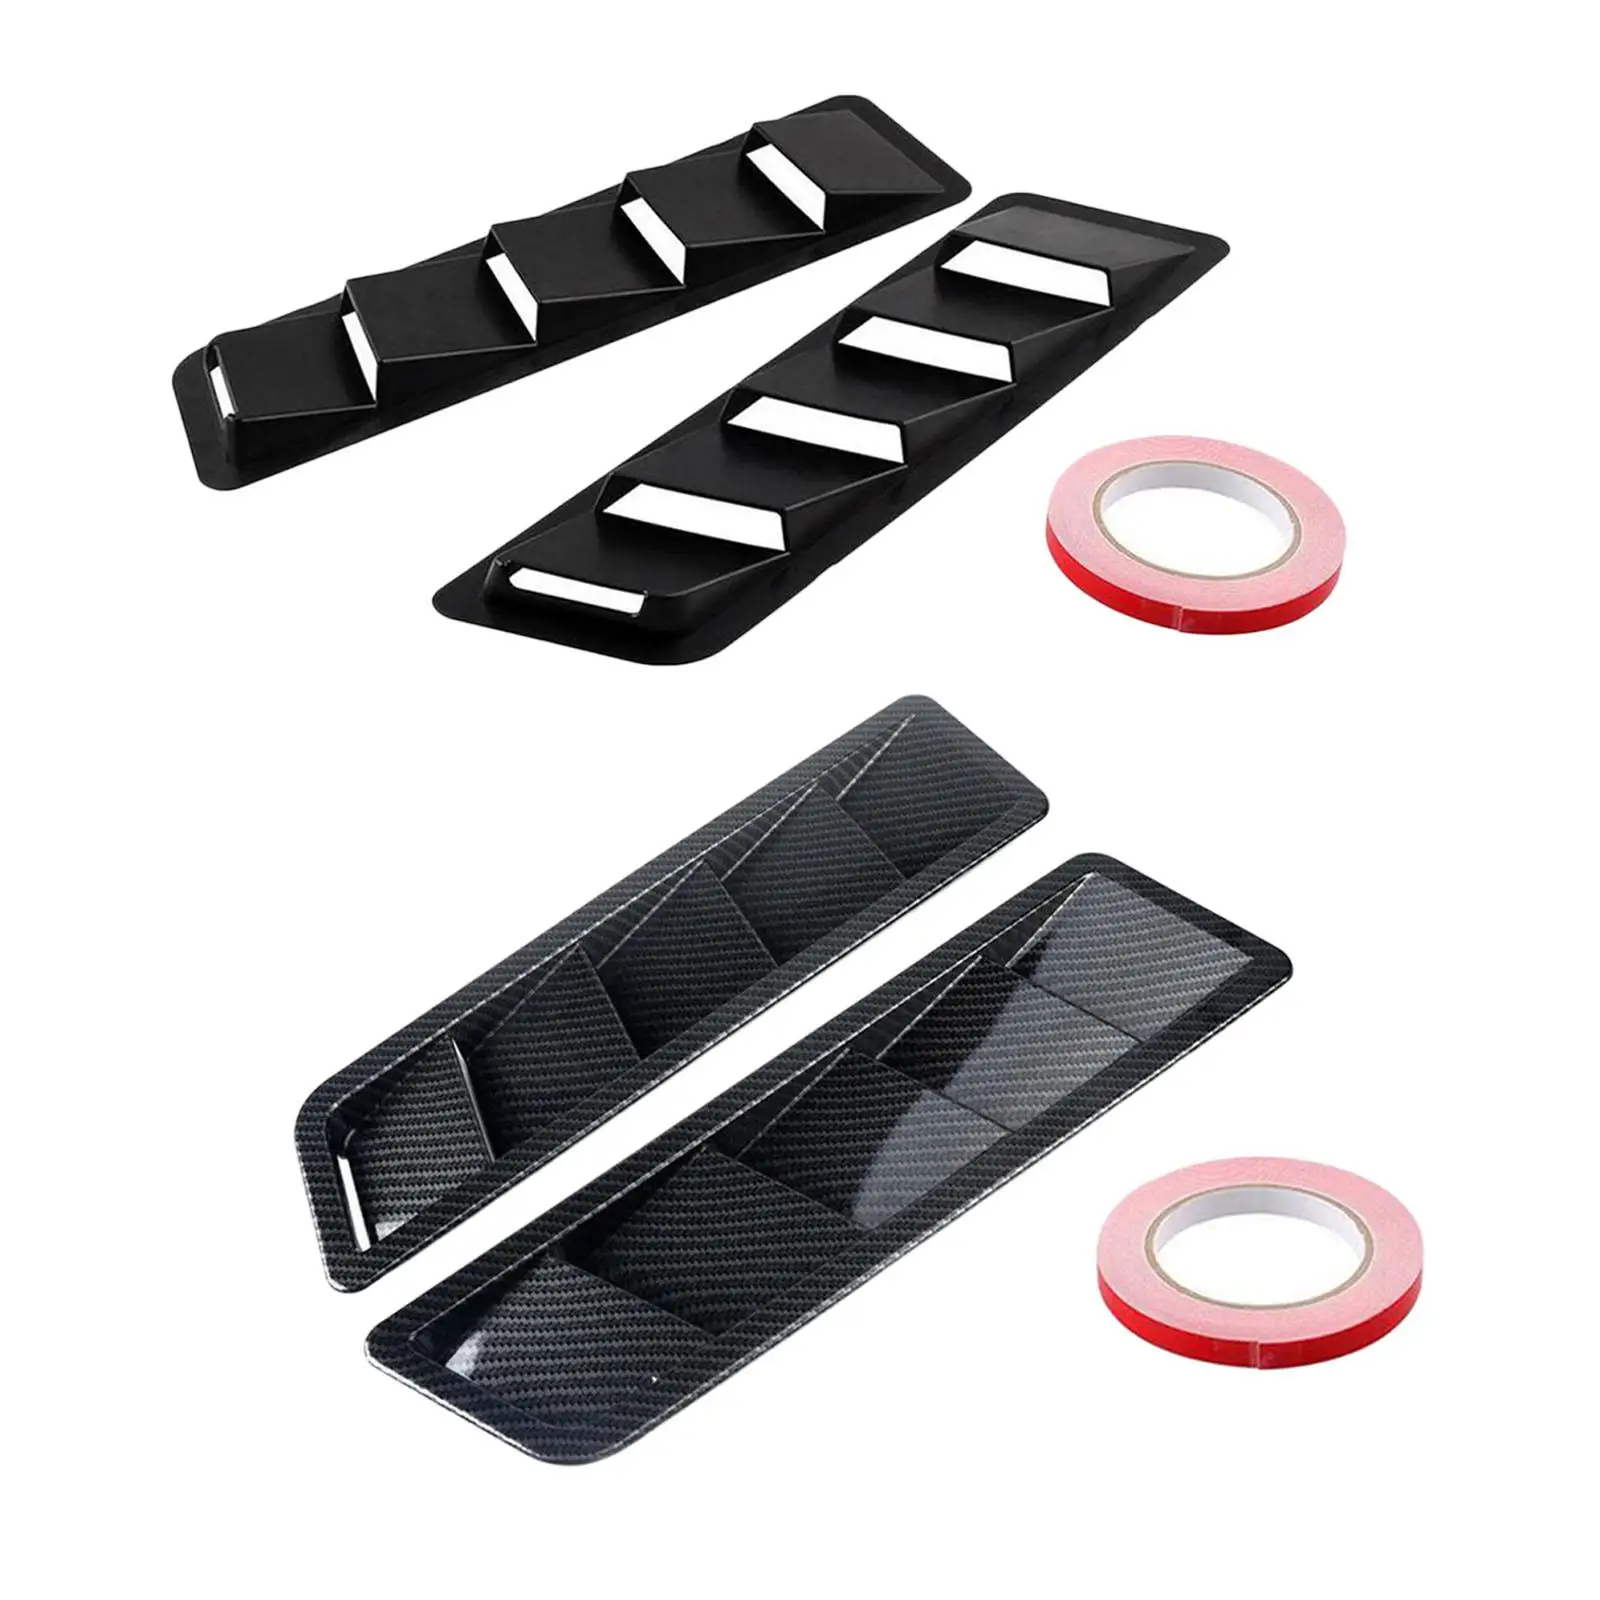 Car Hood Vent Scoop Kit Louver Vents Bonnet Cover Cold Fitment Louvers Air Flow Intake for Acceories Truck SUV